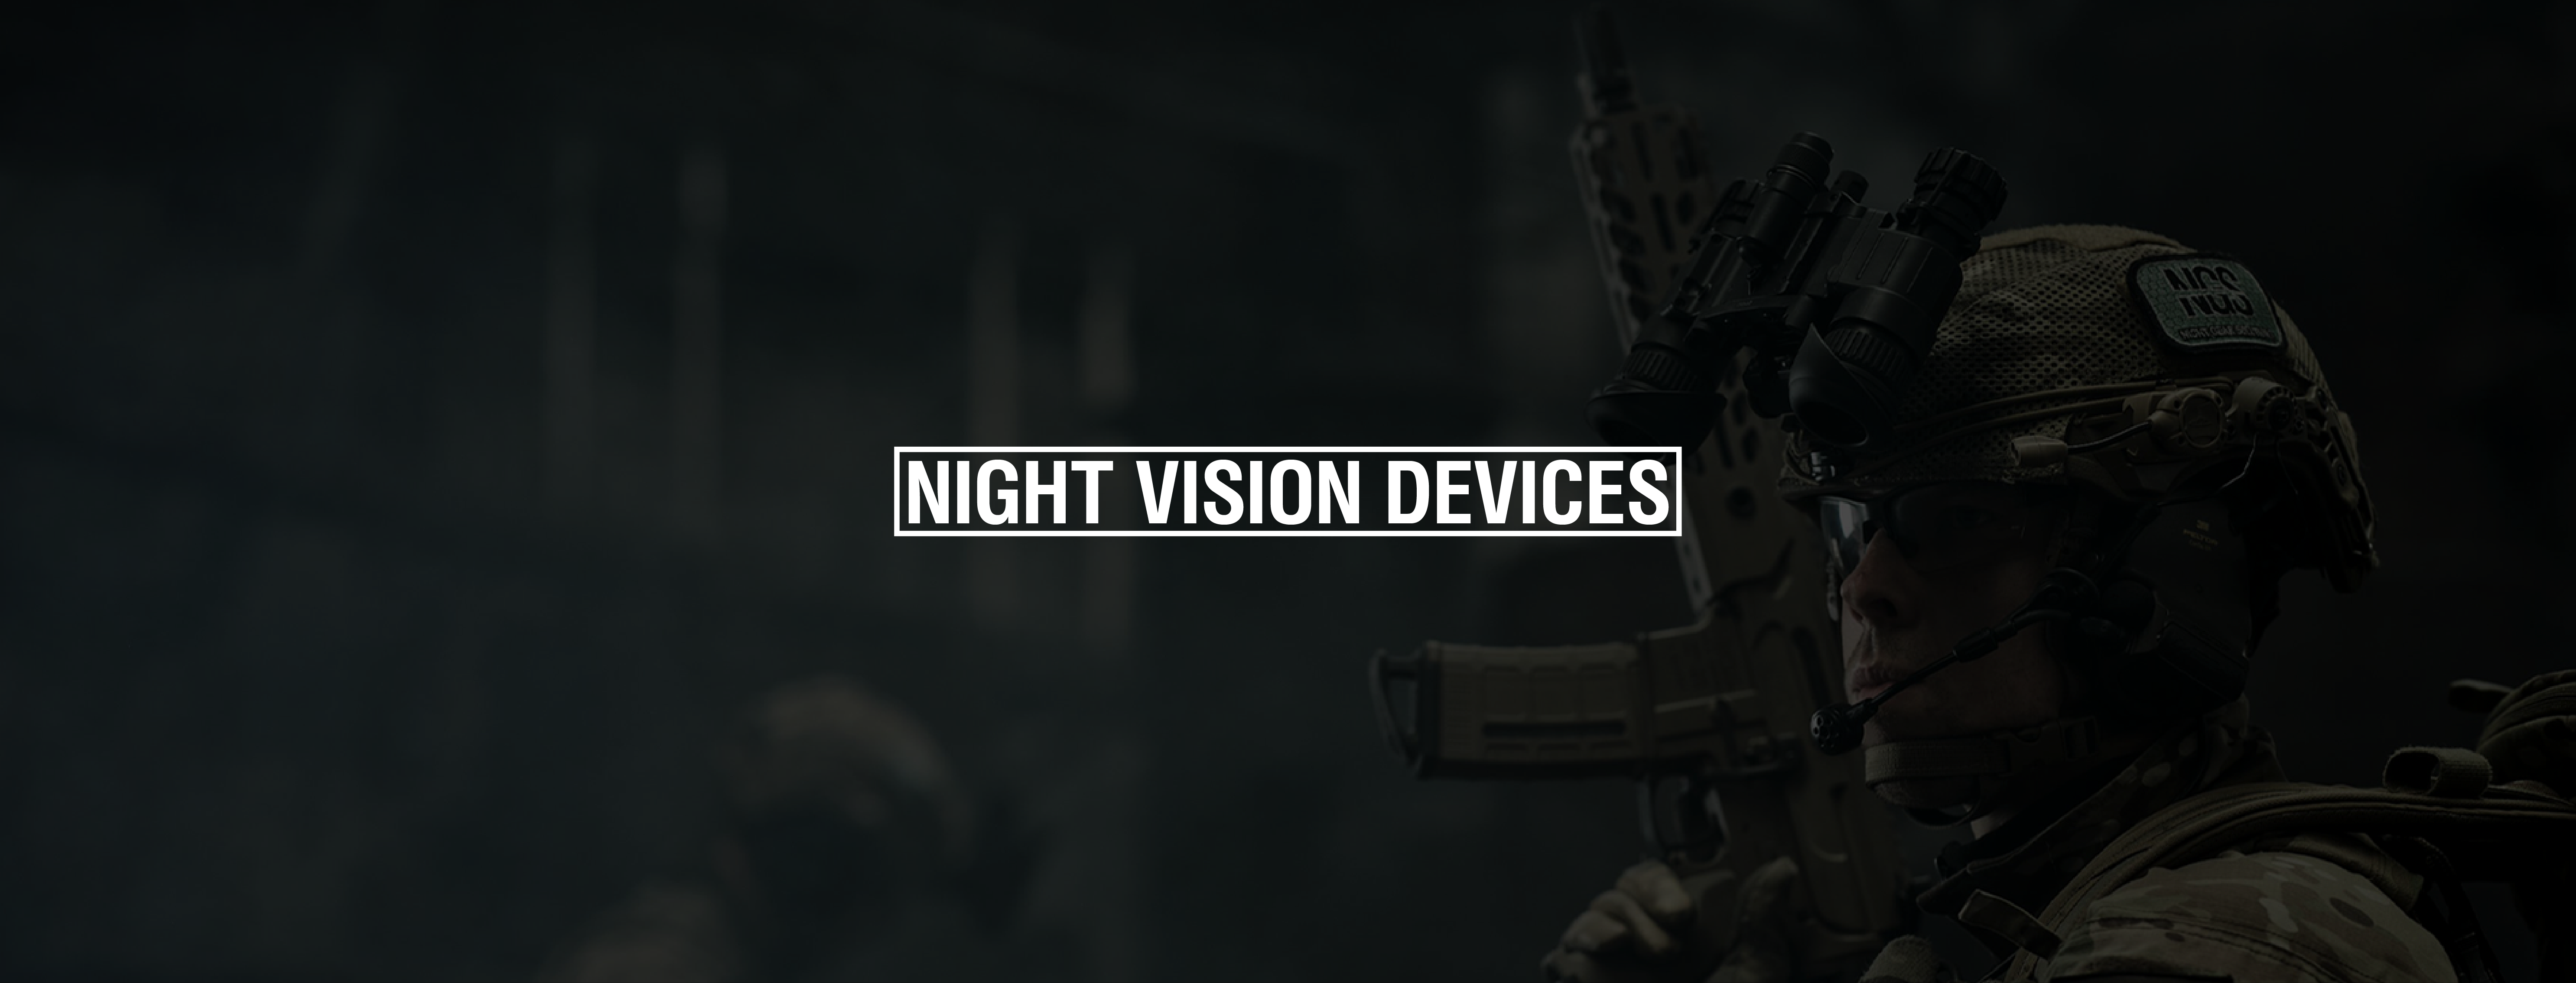 Night Vision Devices From Slovakia to whole EU